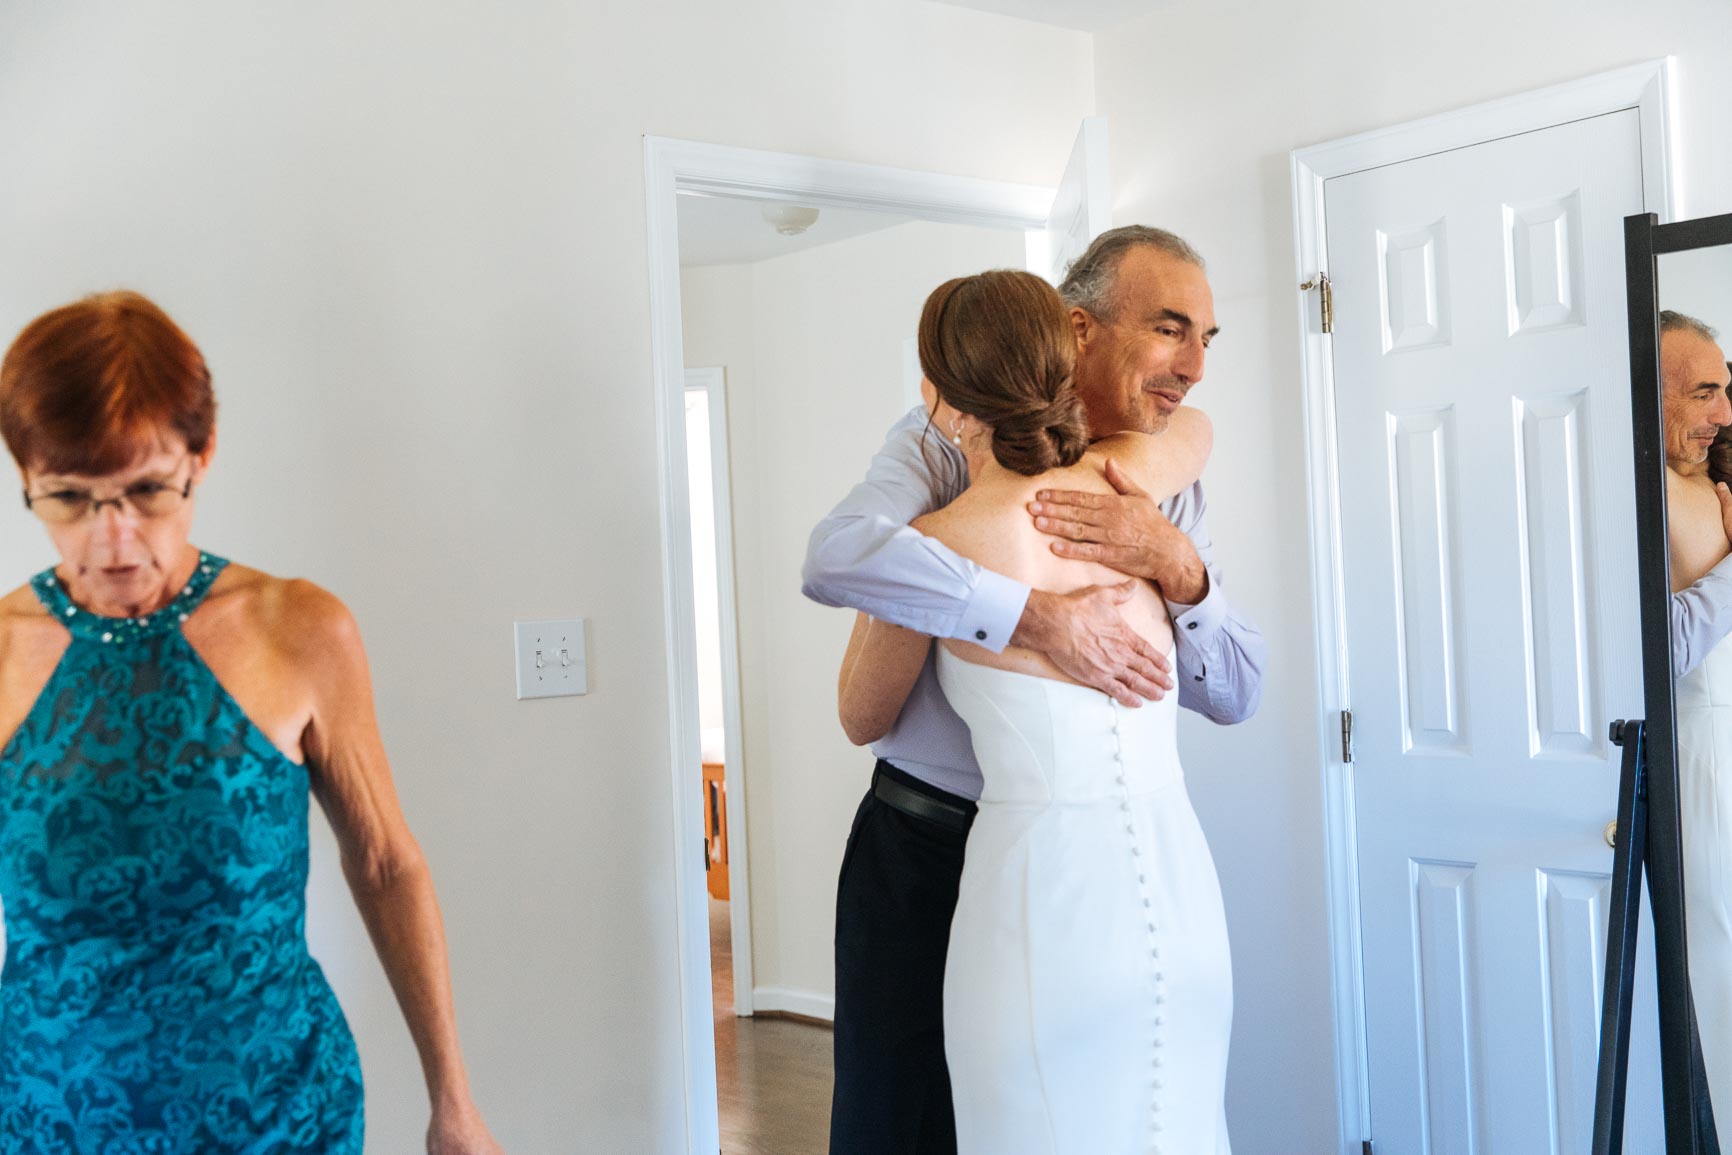 Father and bride first look in Charlotte, NC wedding by Nhieu Tang photography | nhieutang.com